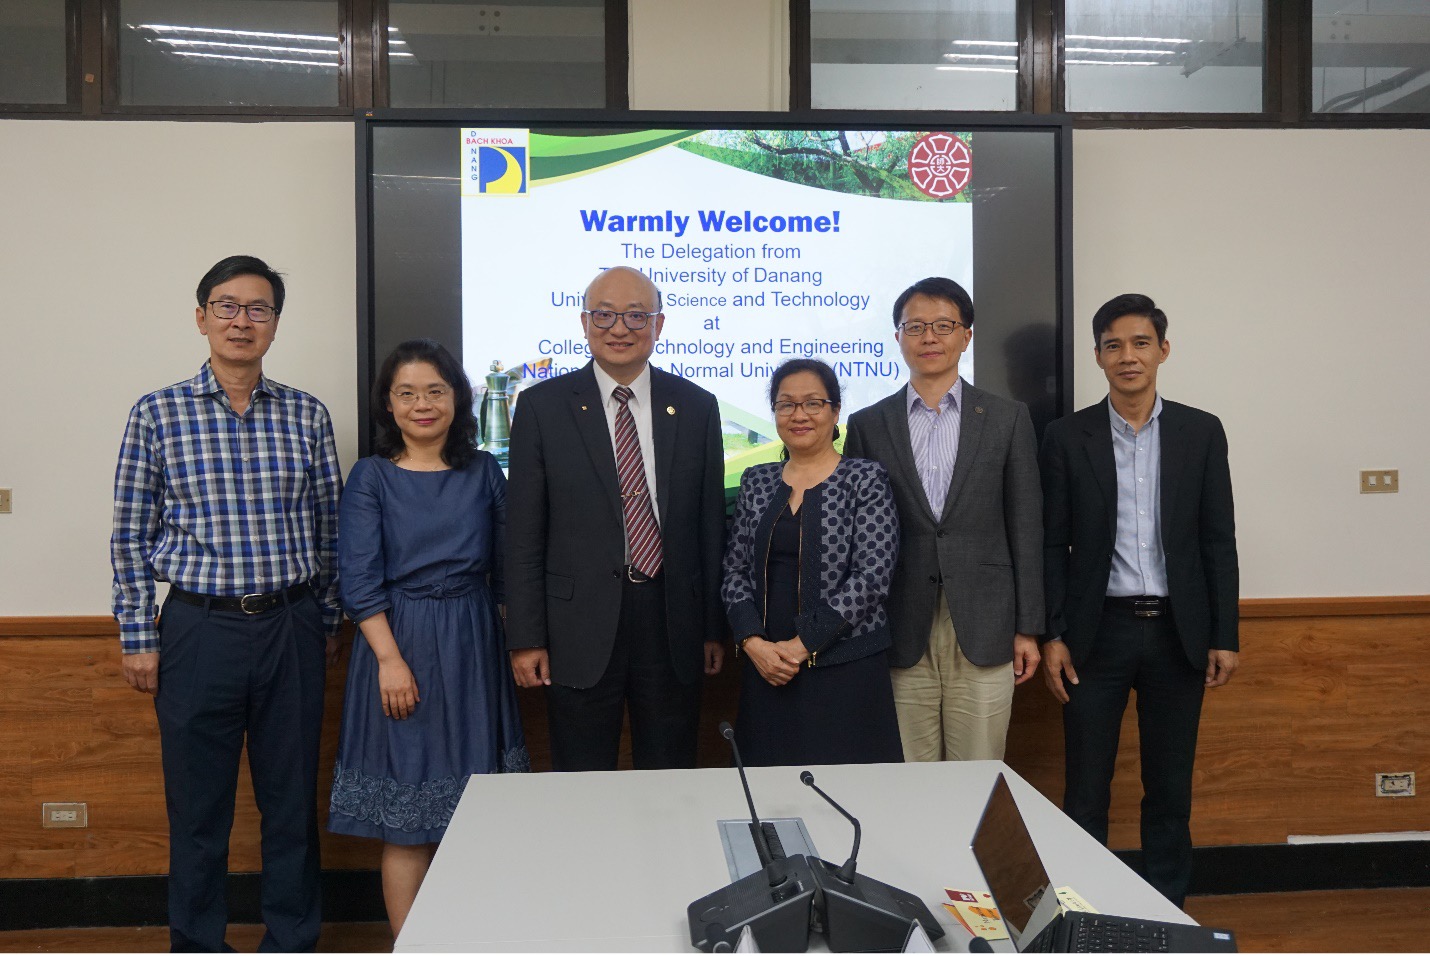 LEADERS OF UNIVERSITY AND FACULTY VISIT AND WORK WITH NATIONAL TAIPEI UNIVERSITY OF EDUCATION